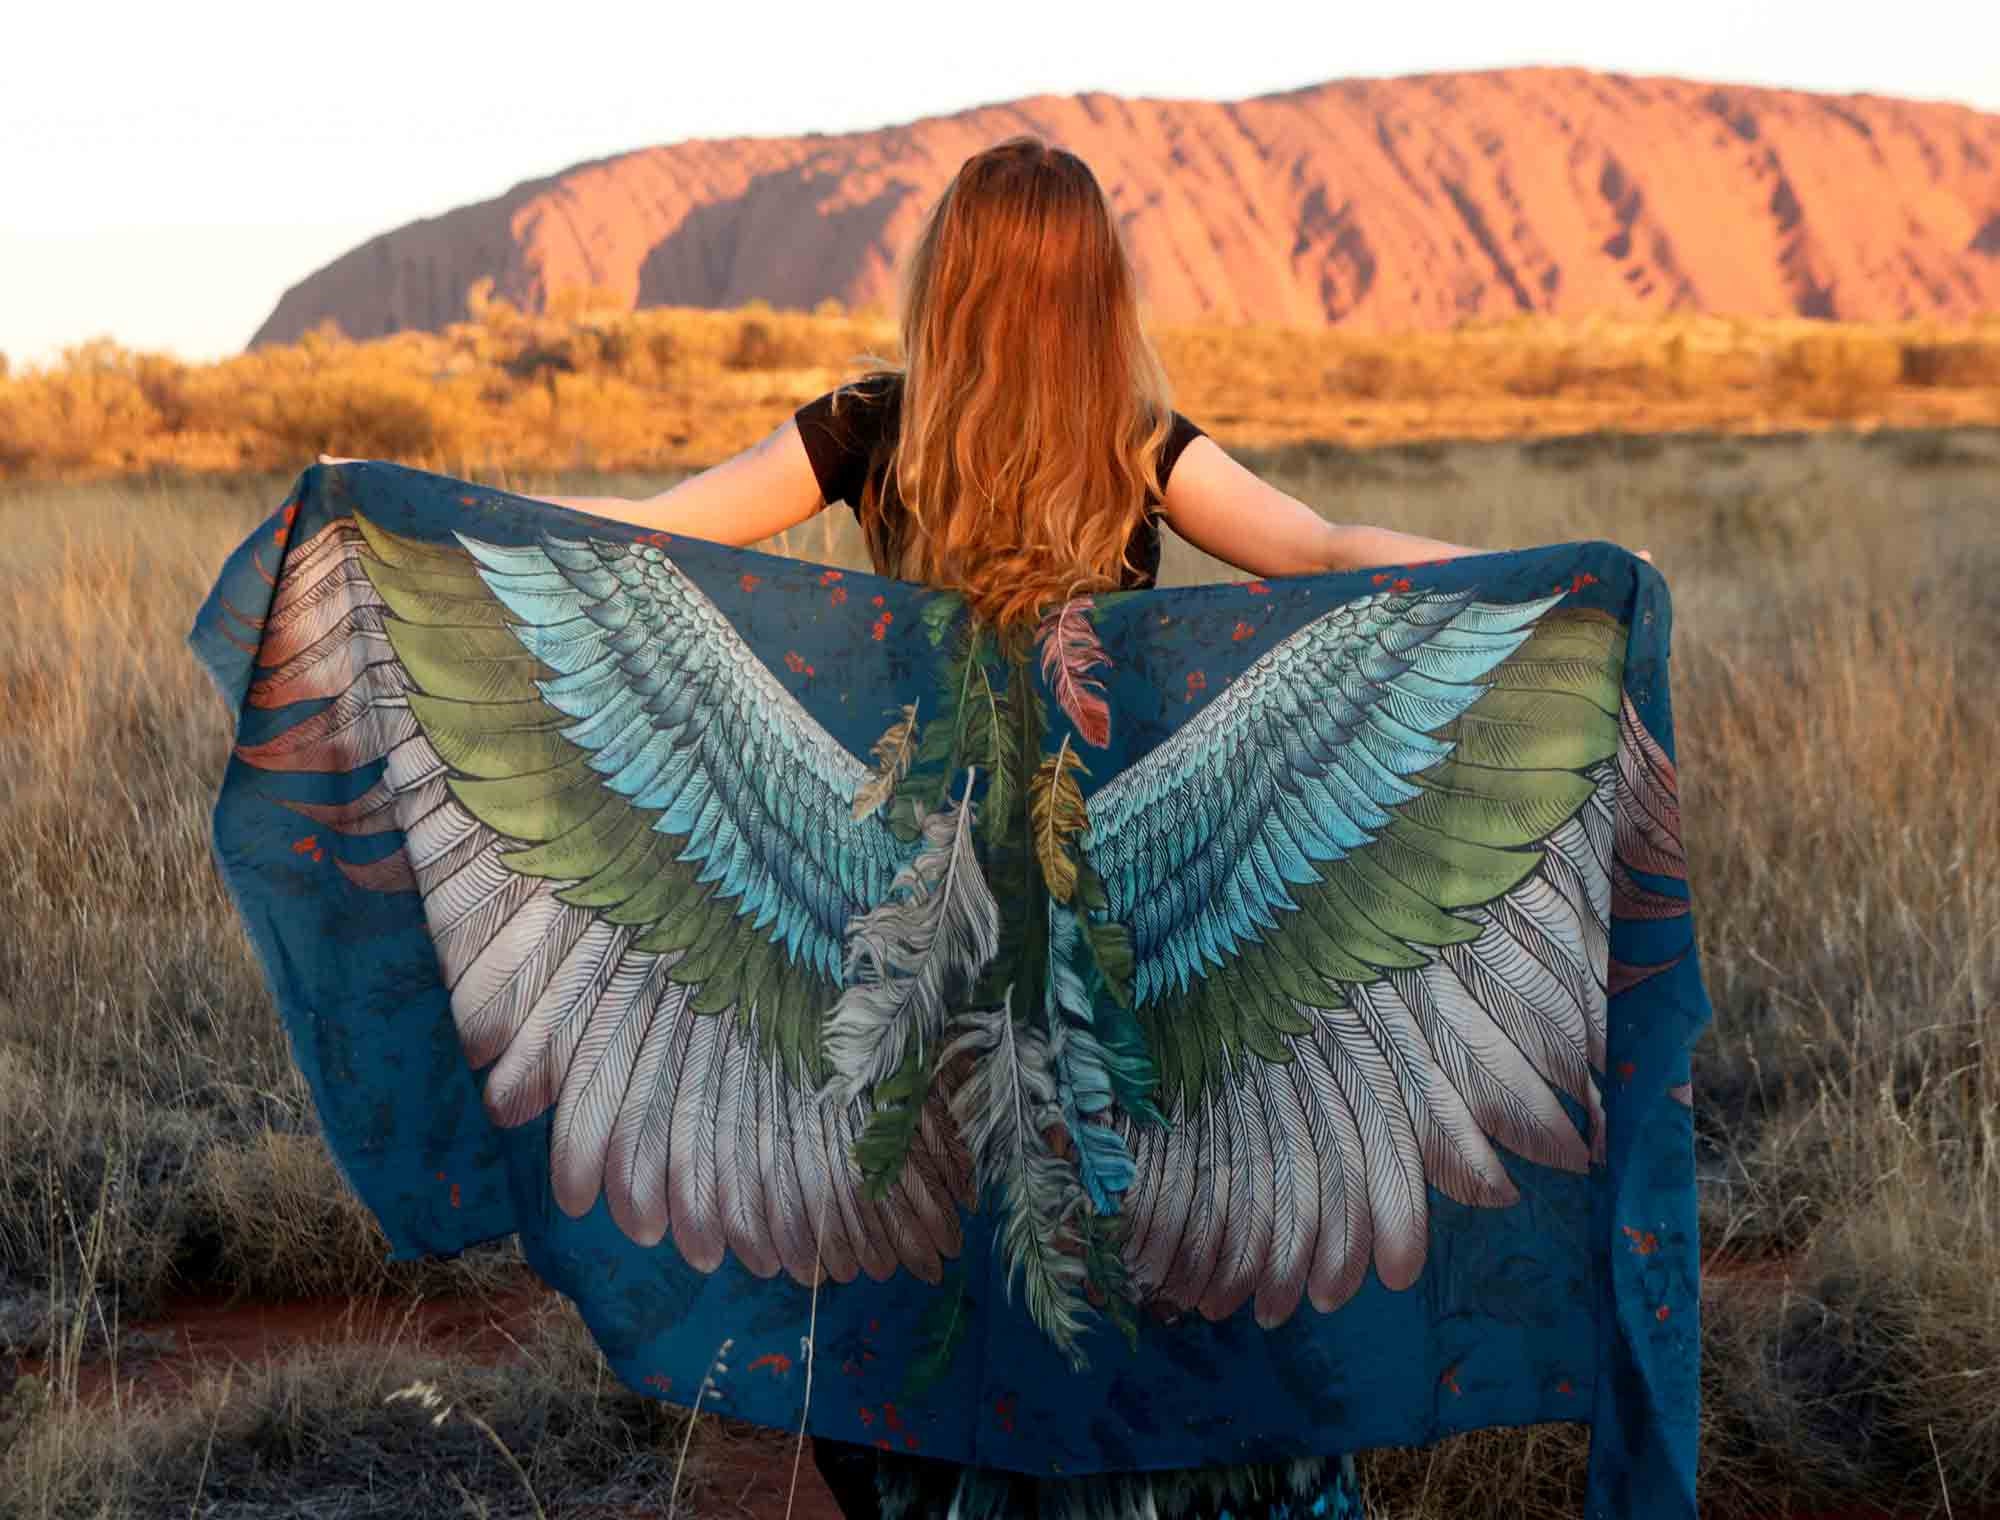 Hong Feather Shawl Fashion Scarf, Bird for Her, Silk Wings Festival Wings Etsy Wing - Kong Jasper Scarf, Shawl, Gift, Oversized Pashmina, Gift Sarong, Wrap